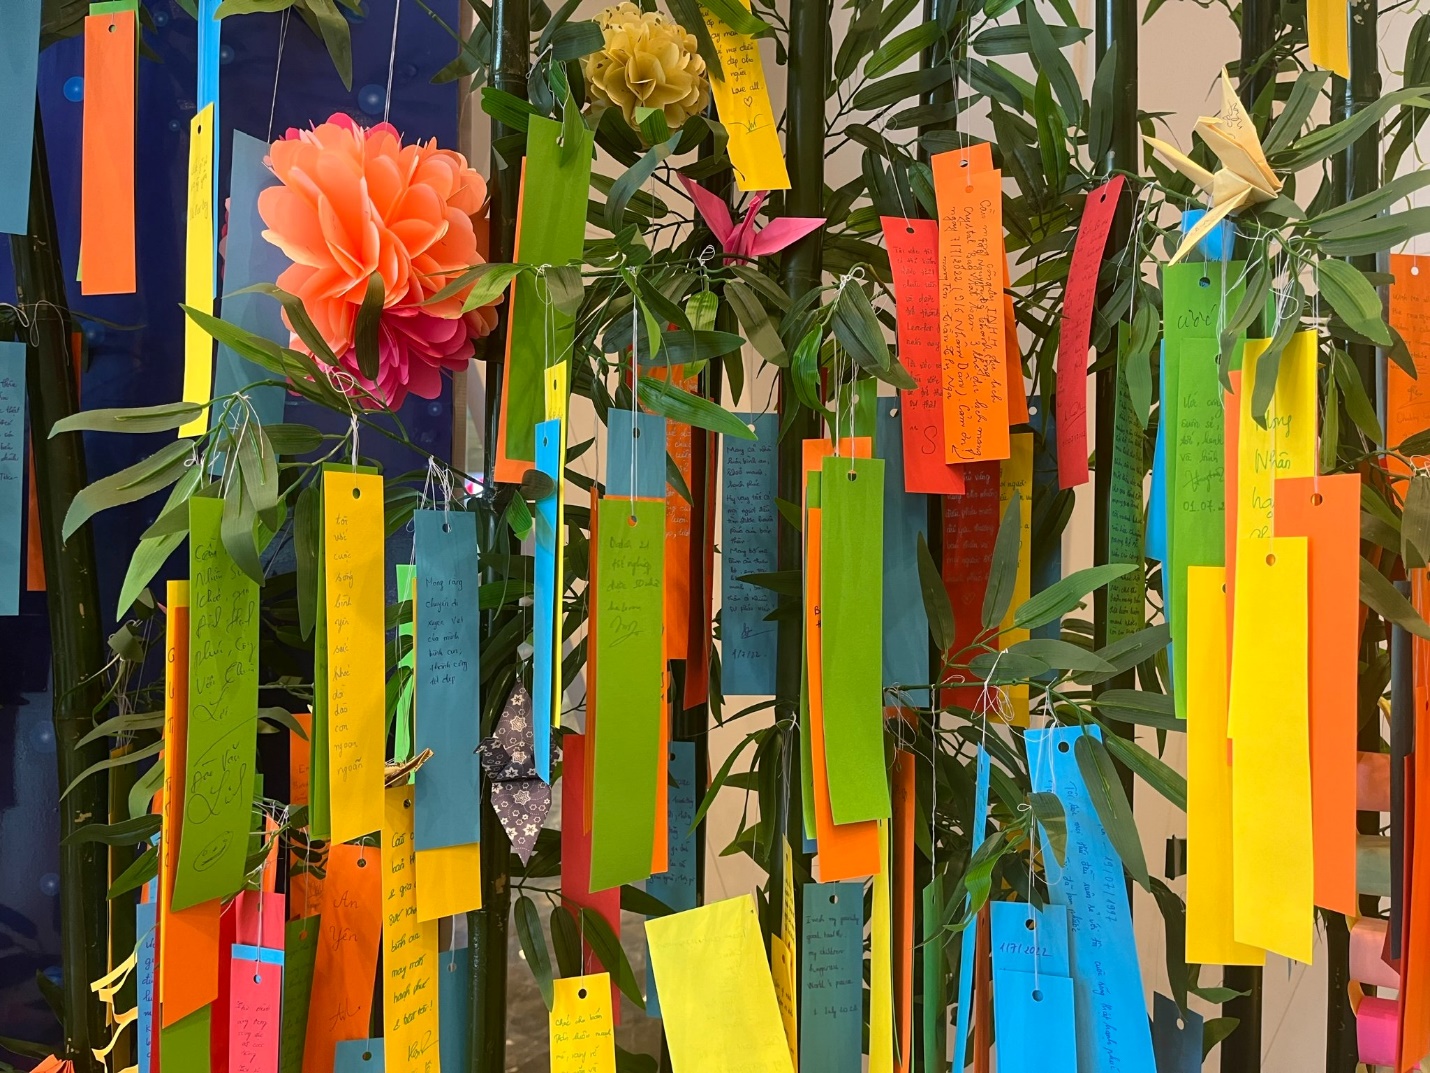 VISAHO's bamboo branches were hung with colorful pieces of paper